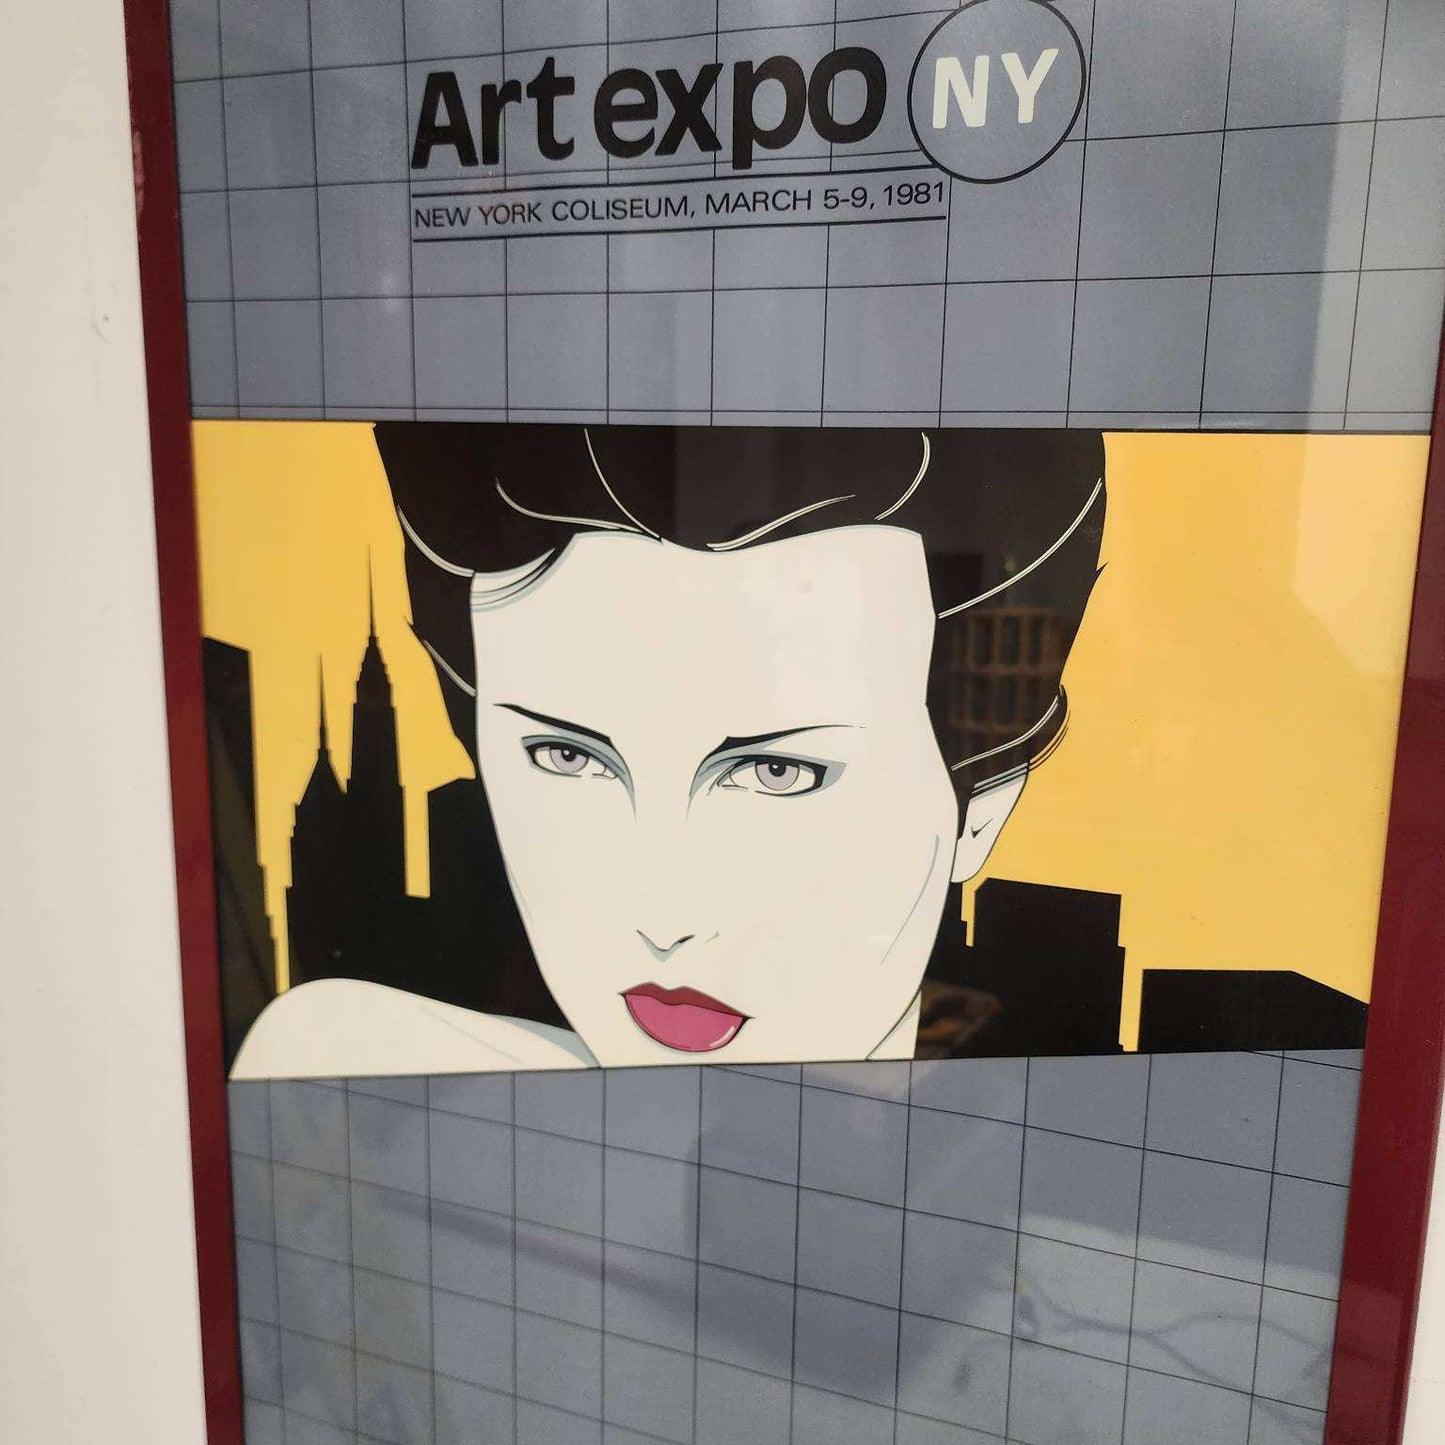 Patrick Nagel Hand Signed & Numbered Lithograph Art Expo NY 1981